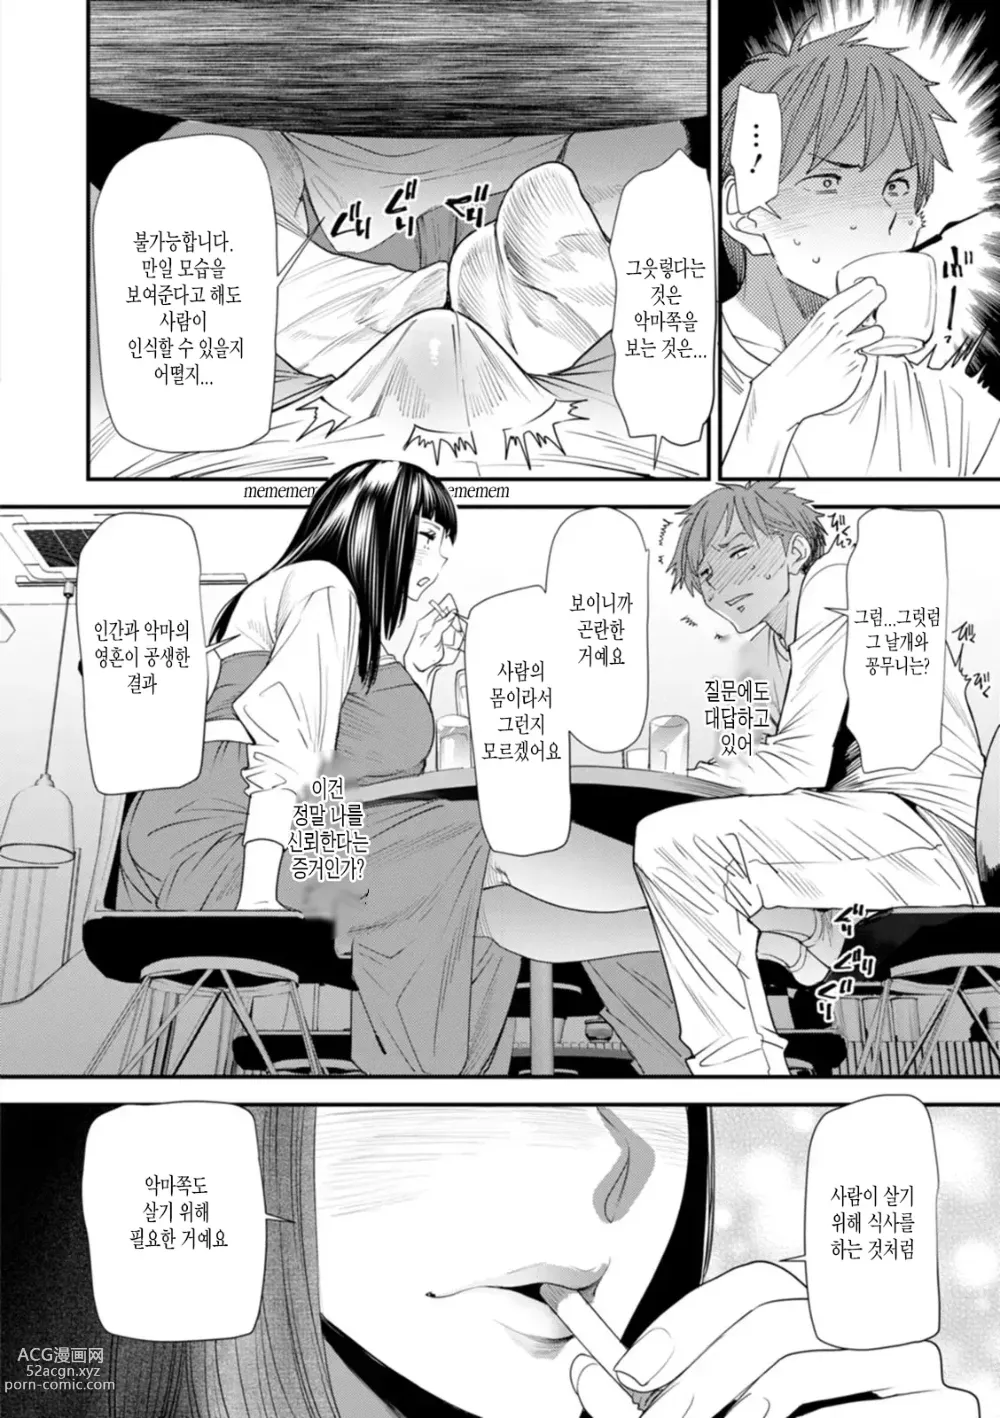 Page 50 of manga Inma Joshi Daisei no Yuuutsu Ch. 1-3  The Melancholy of the Succubus who is a college student 음마 여대생의 우울